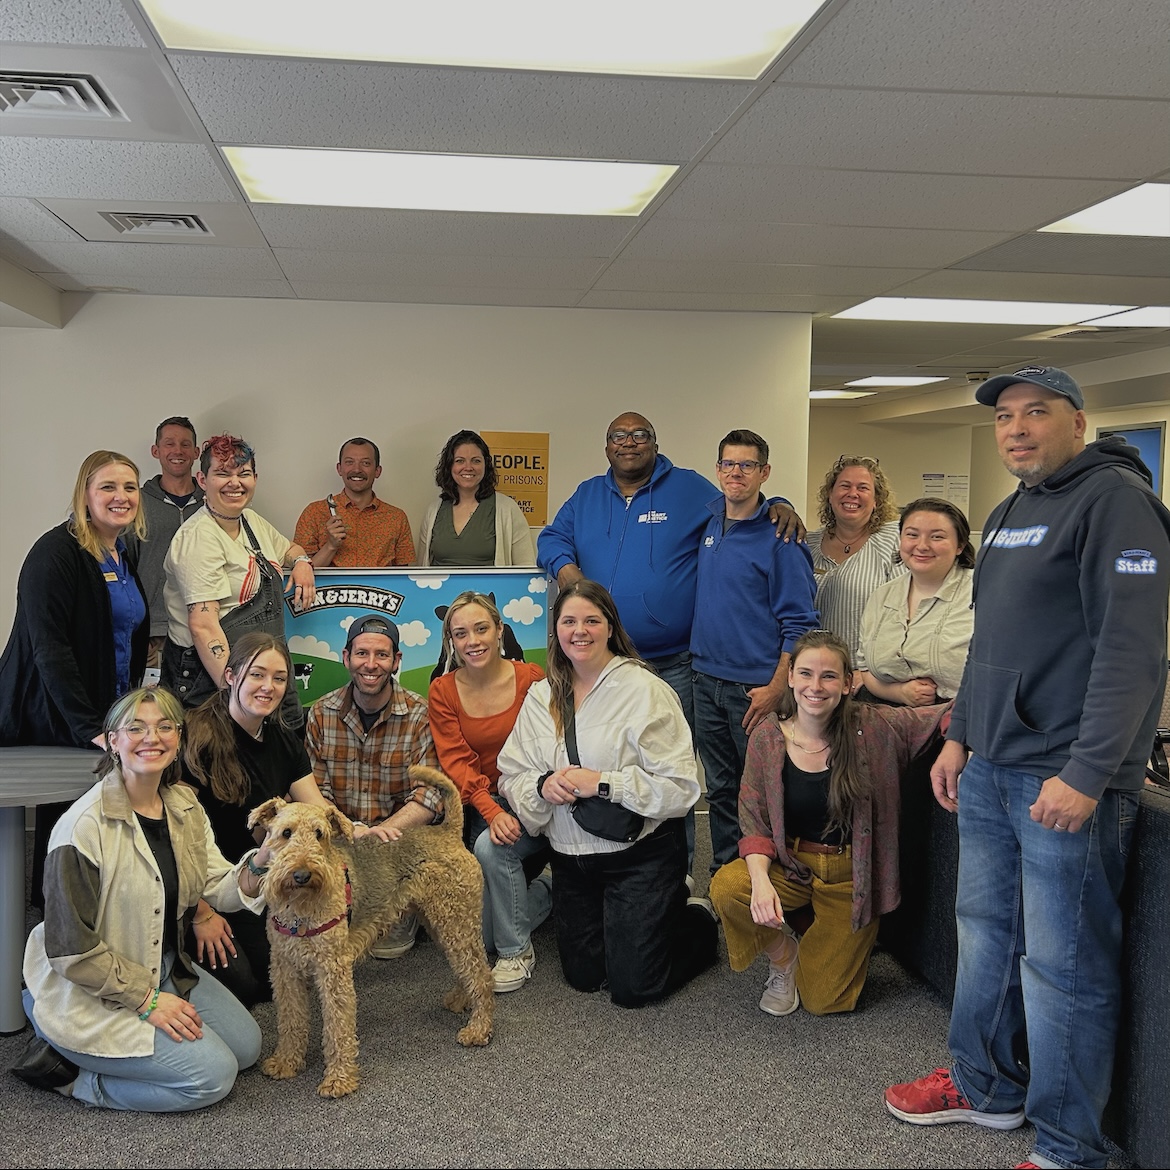 Today, @benjerryct stopped by our Hartford office to celebrate our partnership and the impact that your purchases made to support our racial justice work back in February. Big thanks to @benjerryct and our supporters for helping us kick off this partnership!